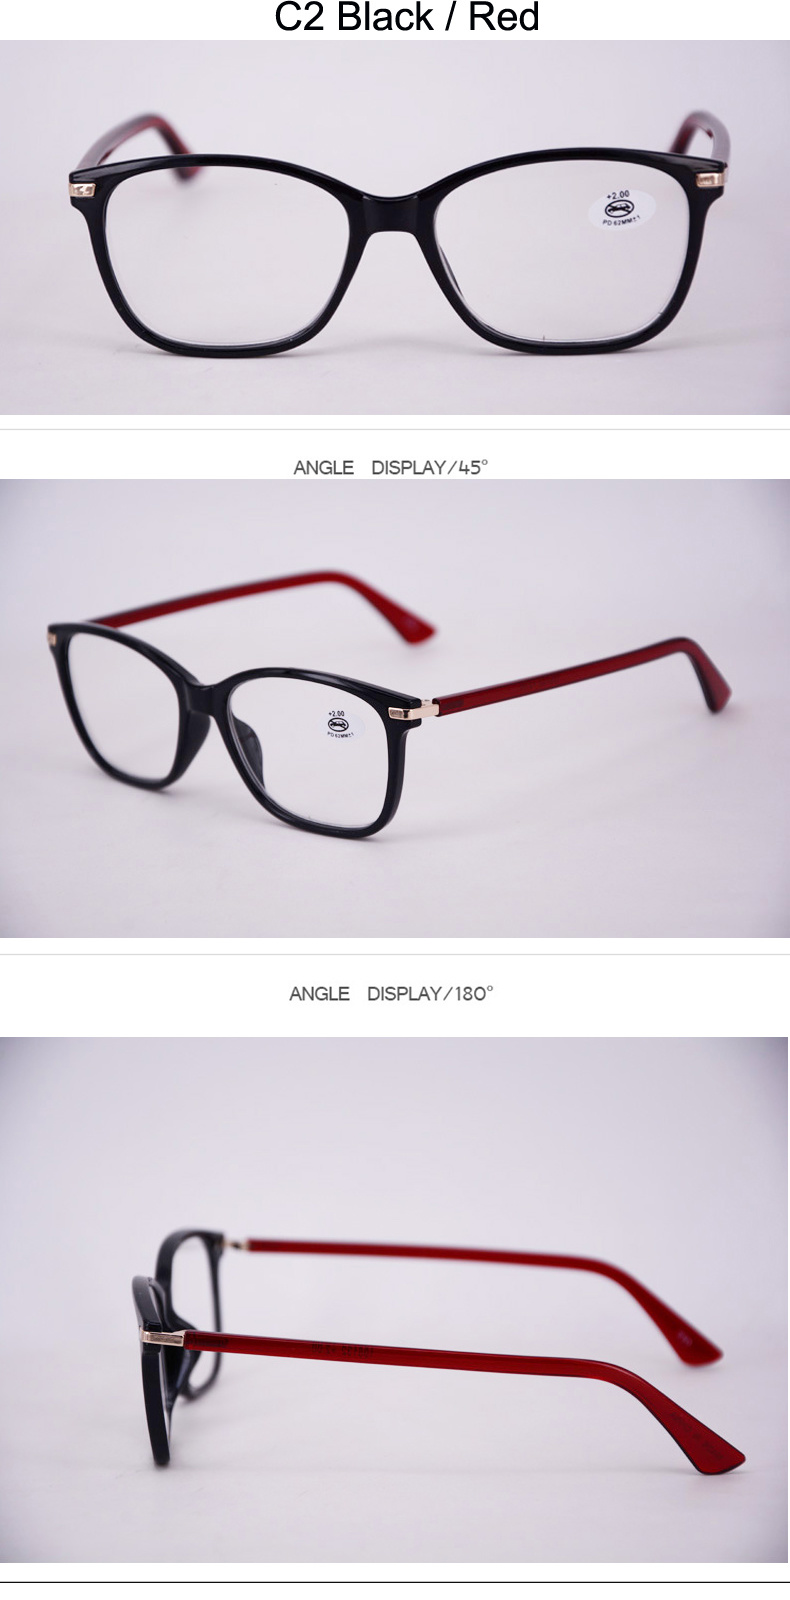 2021 Classical Ready Stock Square Unisex High Quality Presbyopic Glasses Reading Glasses Reader Eyeglasses with Aspheric Power Lens